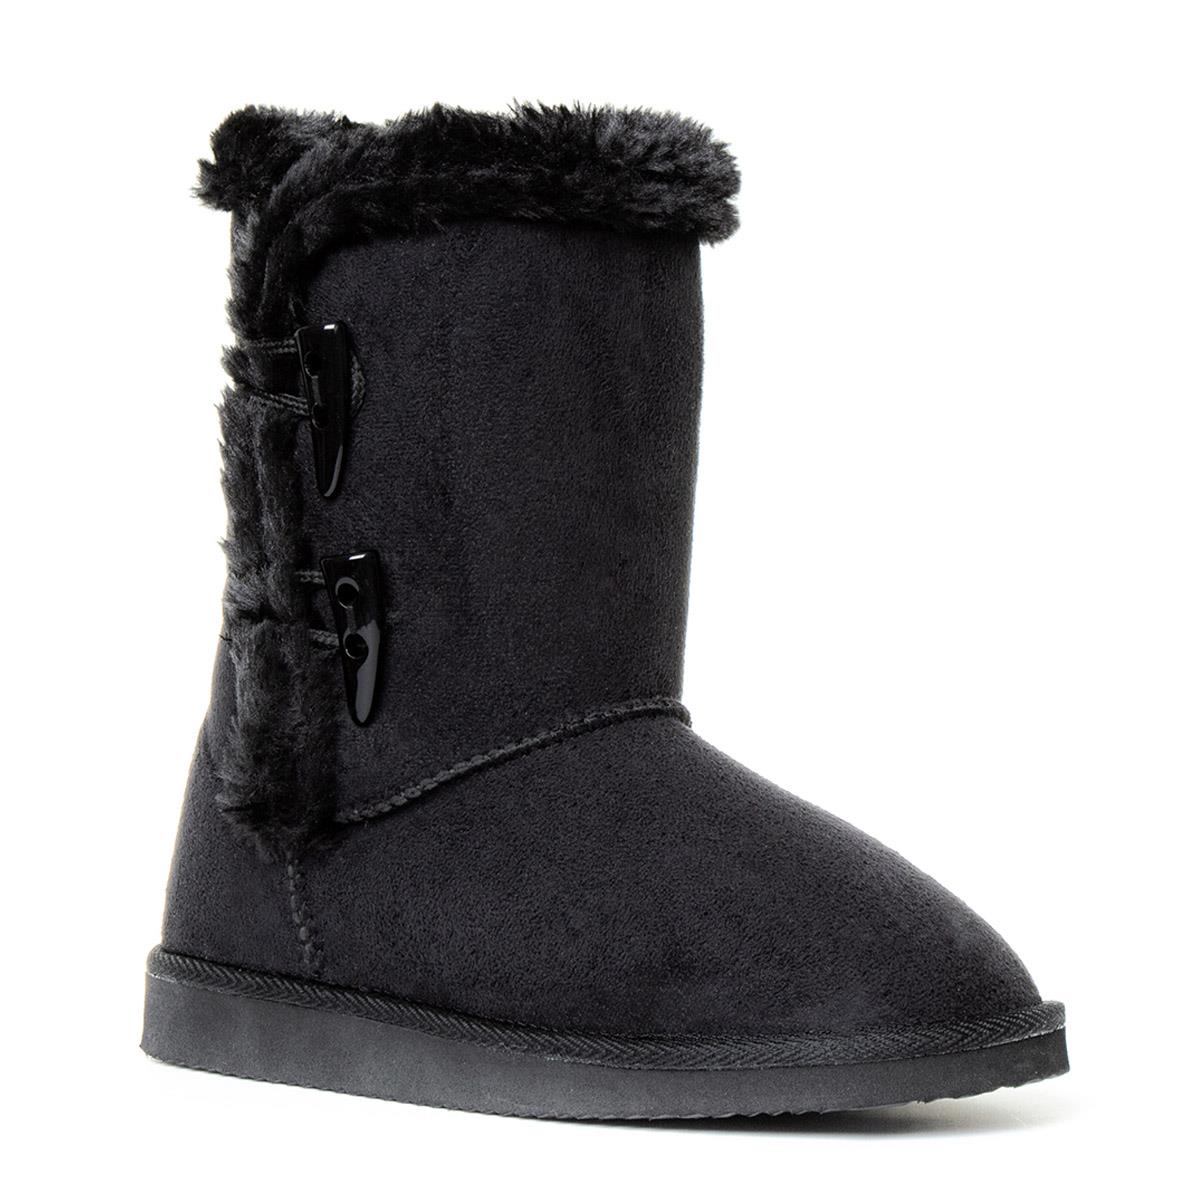 Womens Black Toggle Boot with Faux Fur Lining-18620 | Shoe Zone